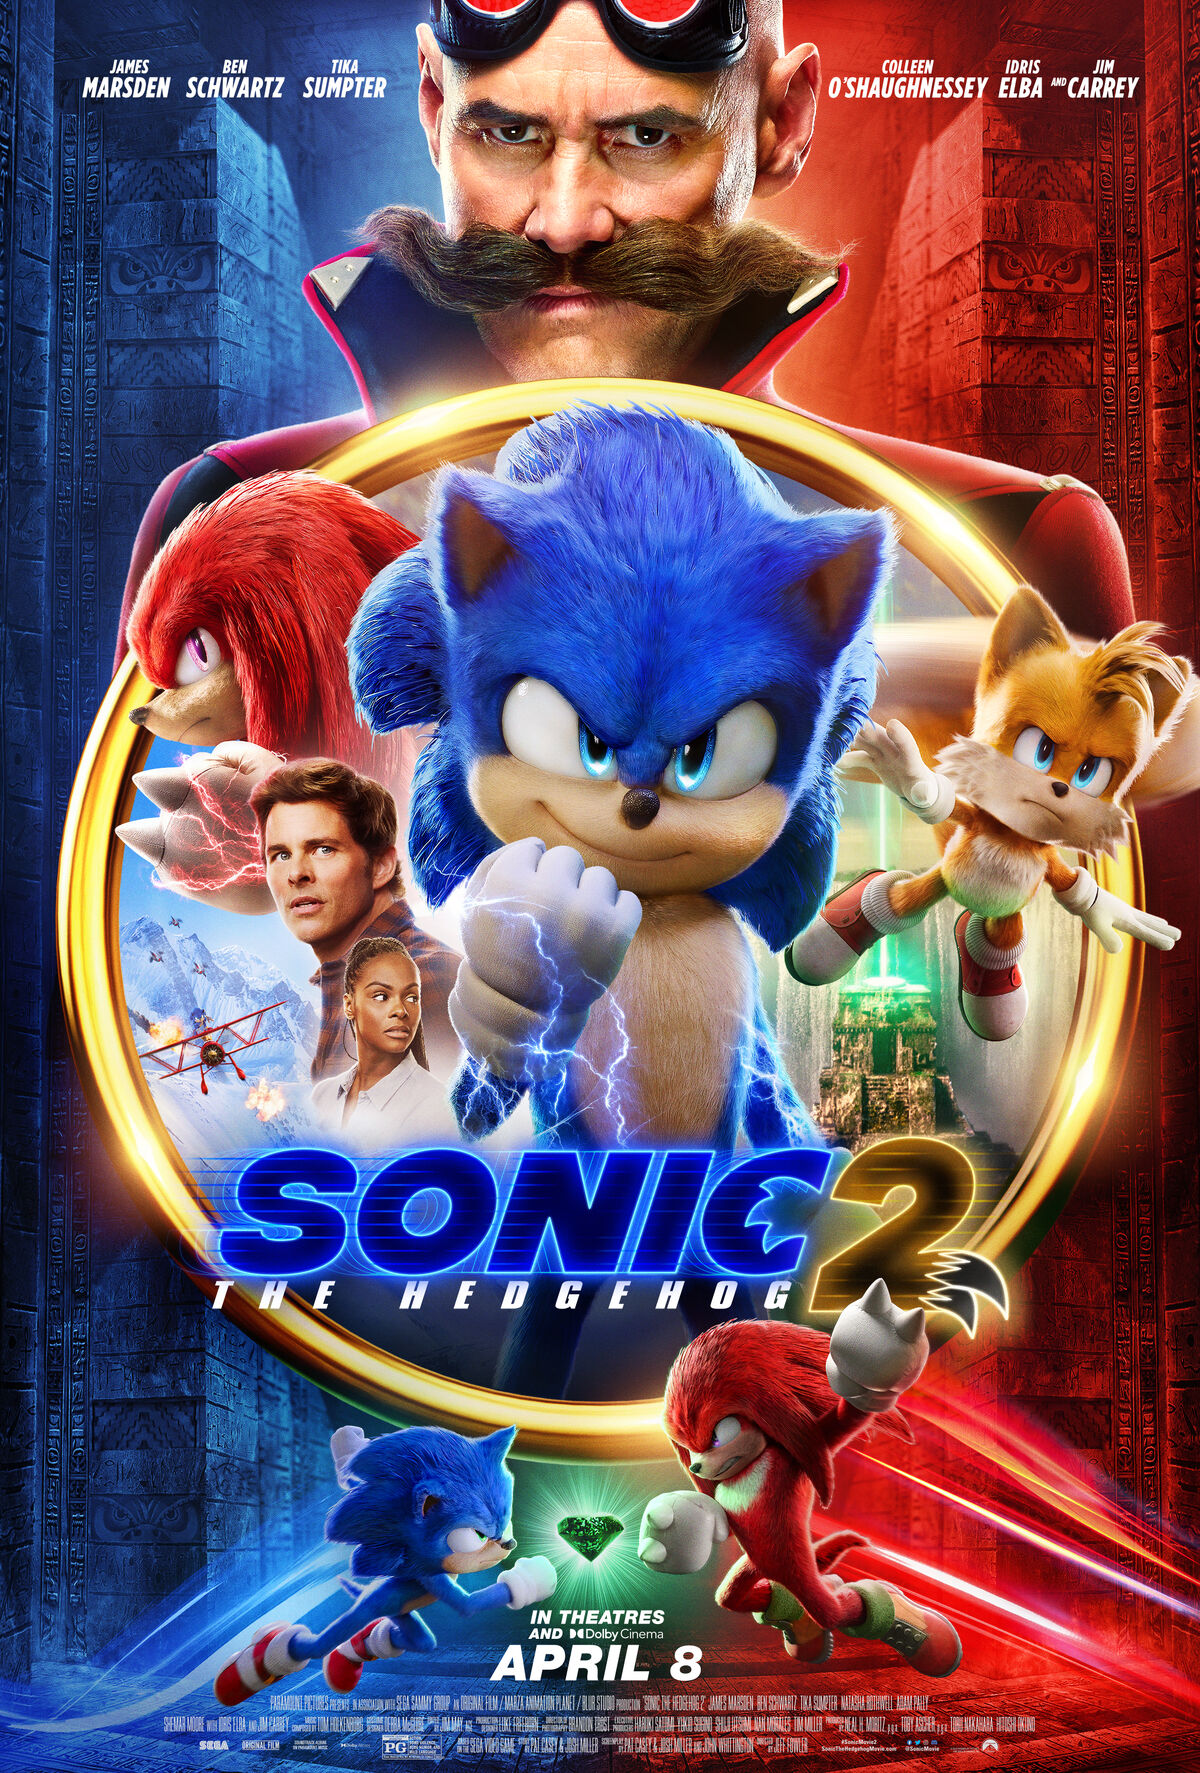 Sonic 2 sweeps the nation being No. 3 for the sixth weekend since its  release – The Advocate